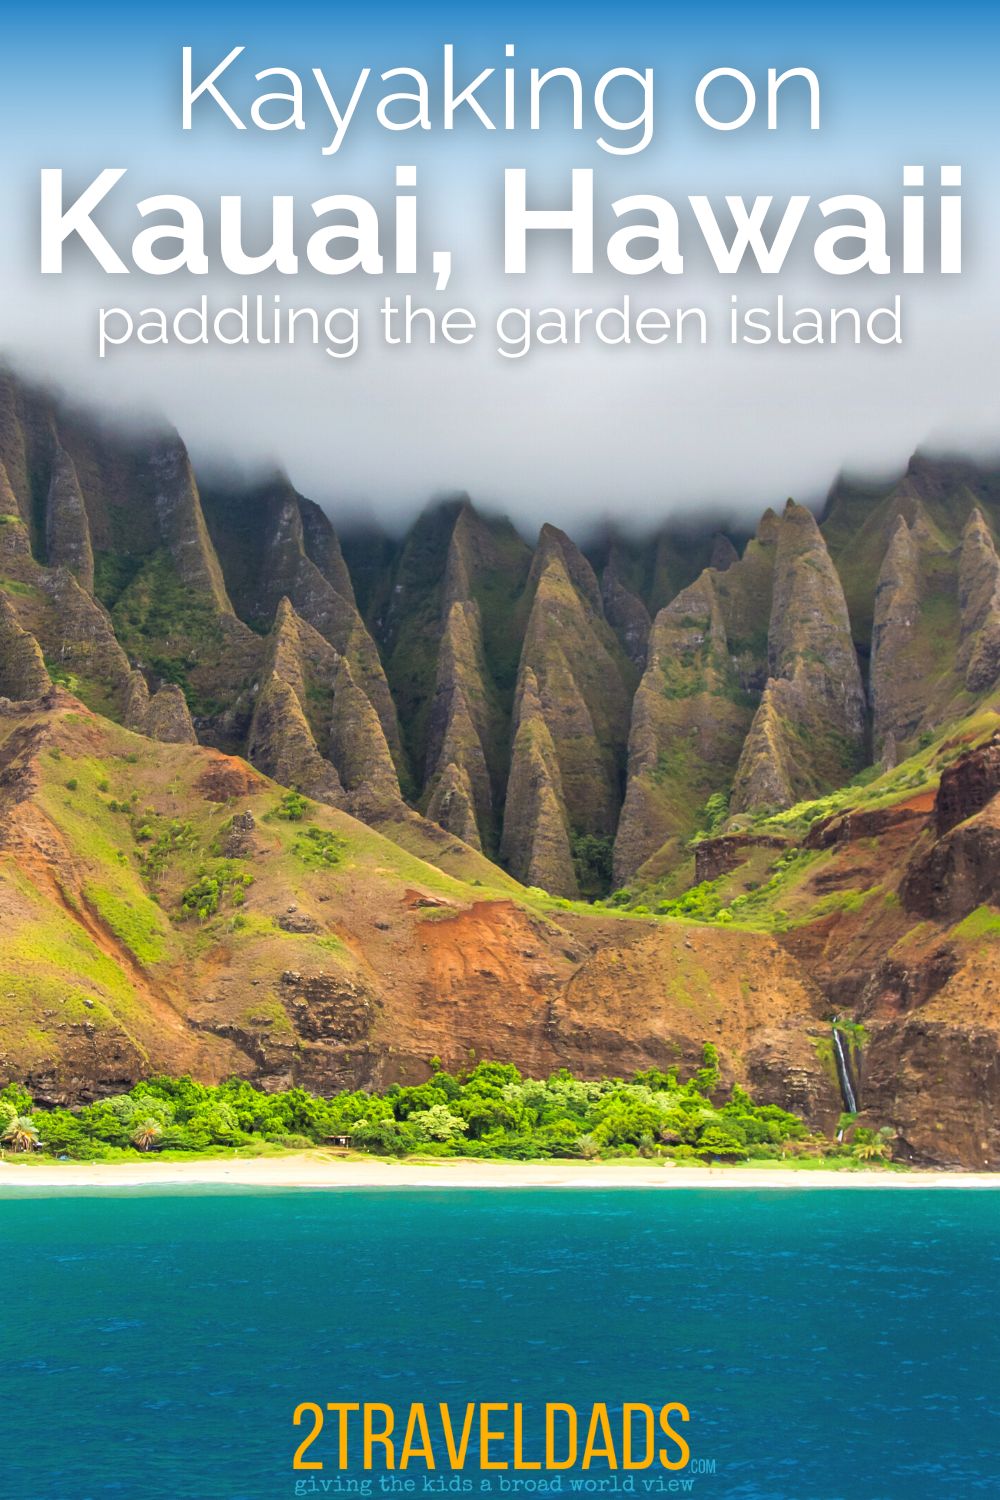 Kayaking Kauai is an awesome experience to add to your Hawaii vacation. With navigable rivers, bays and epic sea kayaking, we've pick spots for beginners and experienced kayakers visiting Kauai.